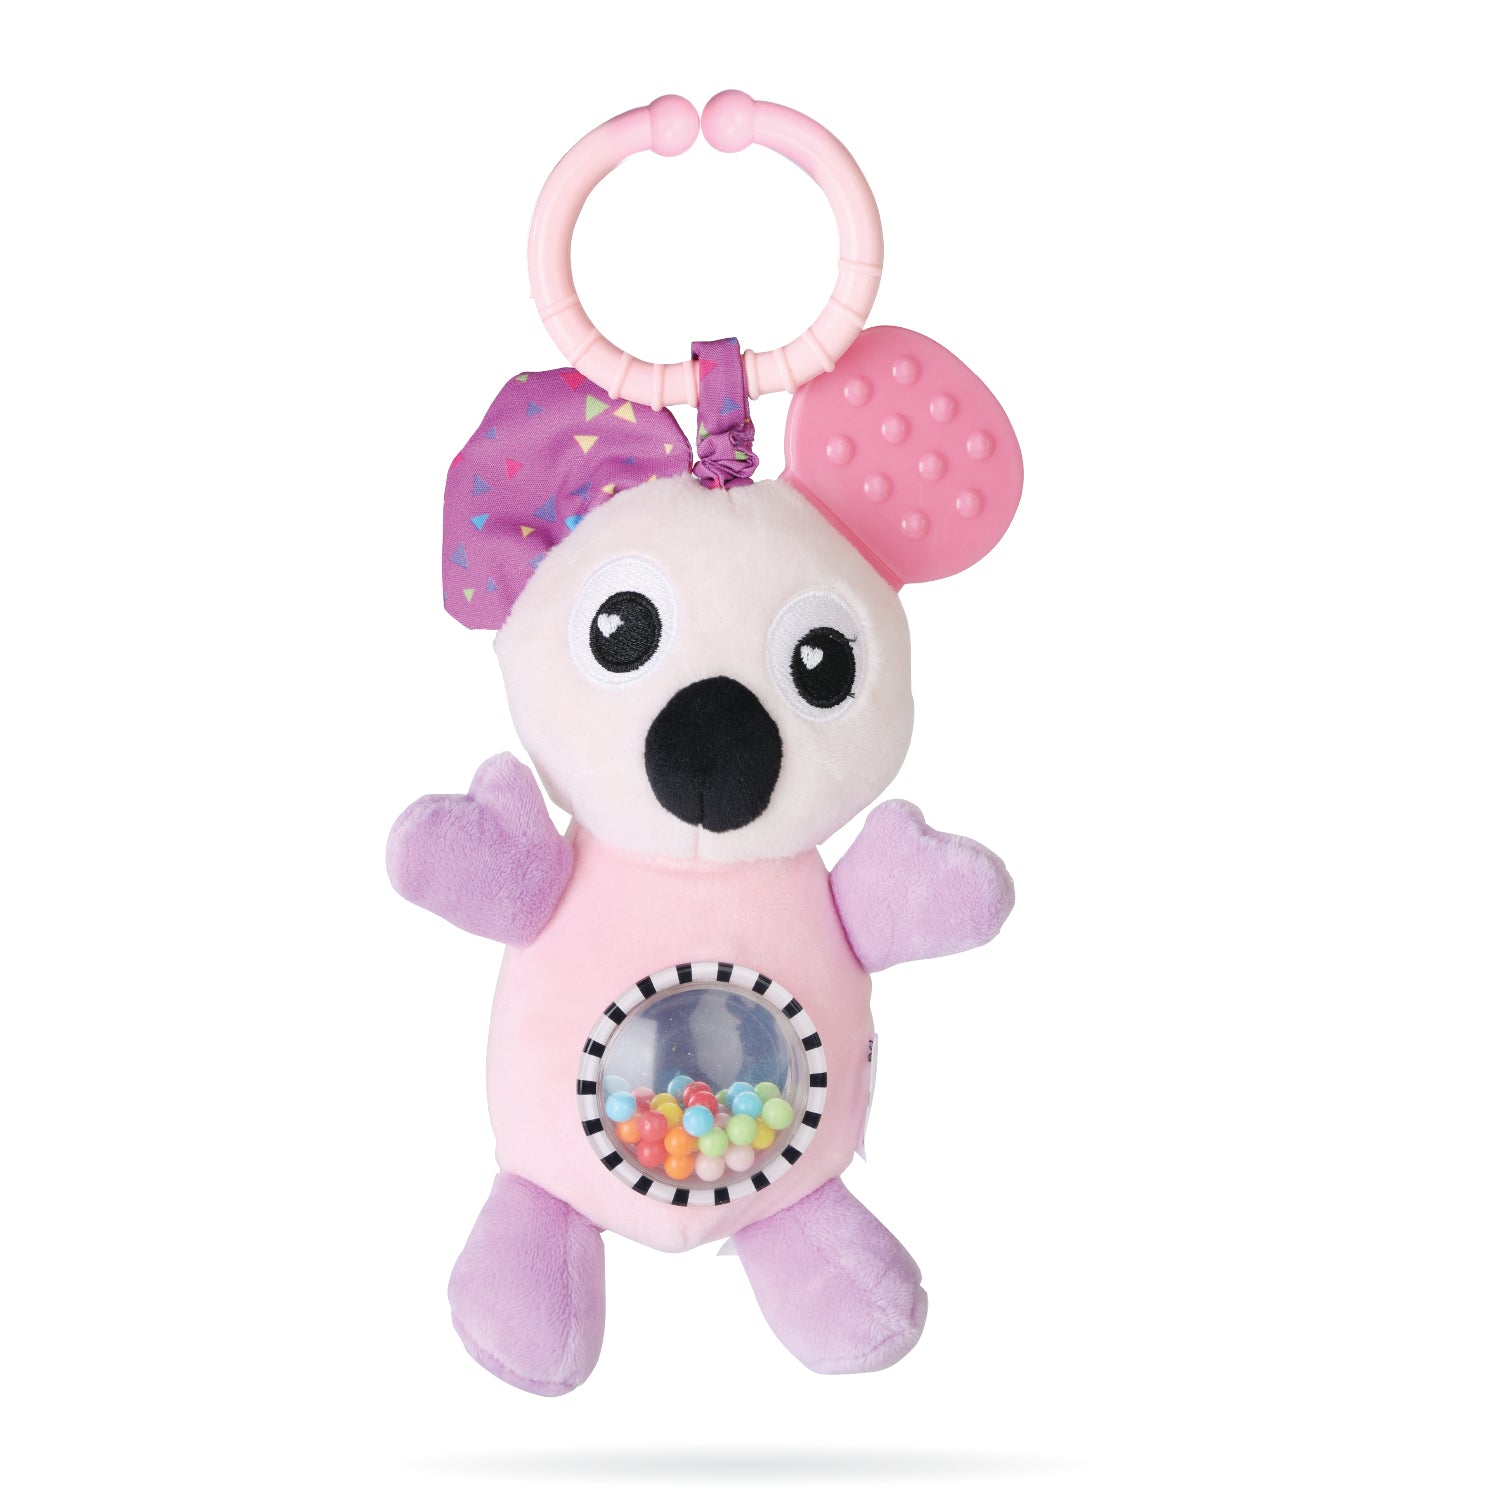 Nuluv Koala Jittery Plush Toy I Hanging Rattle & Teether I Stroller Toy for Baby 3 Months+